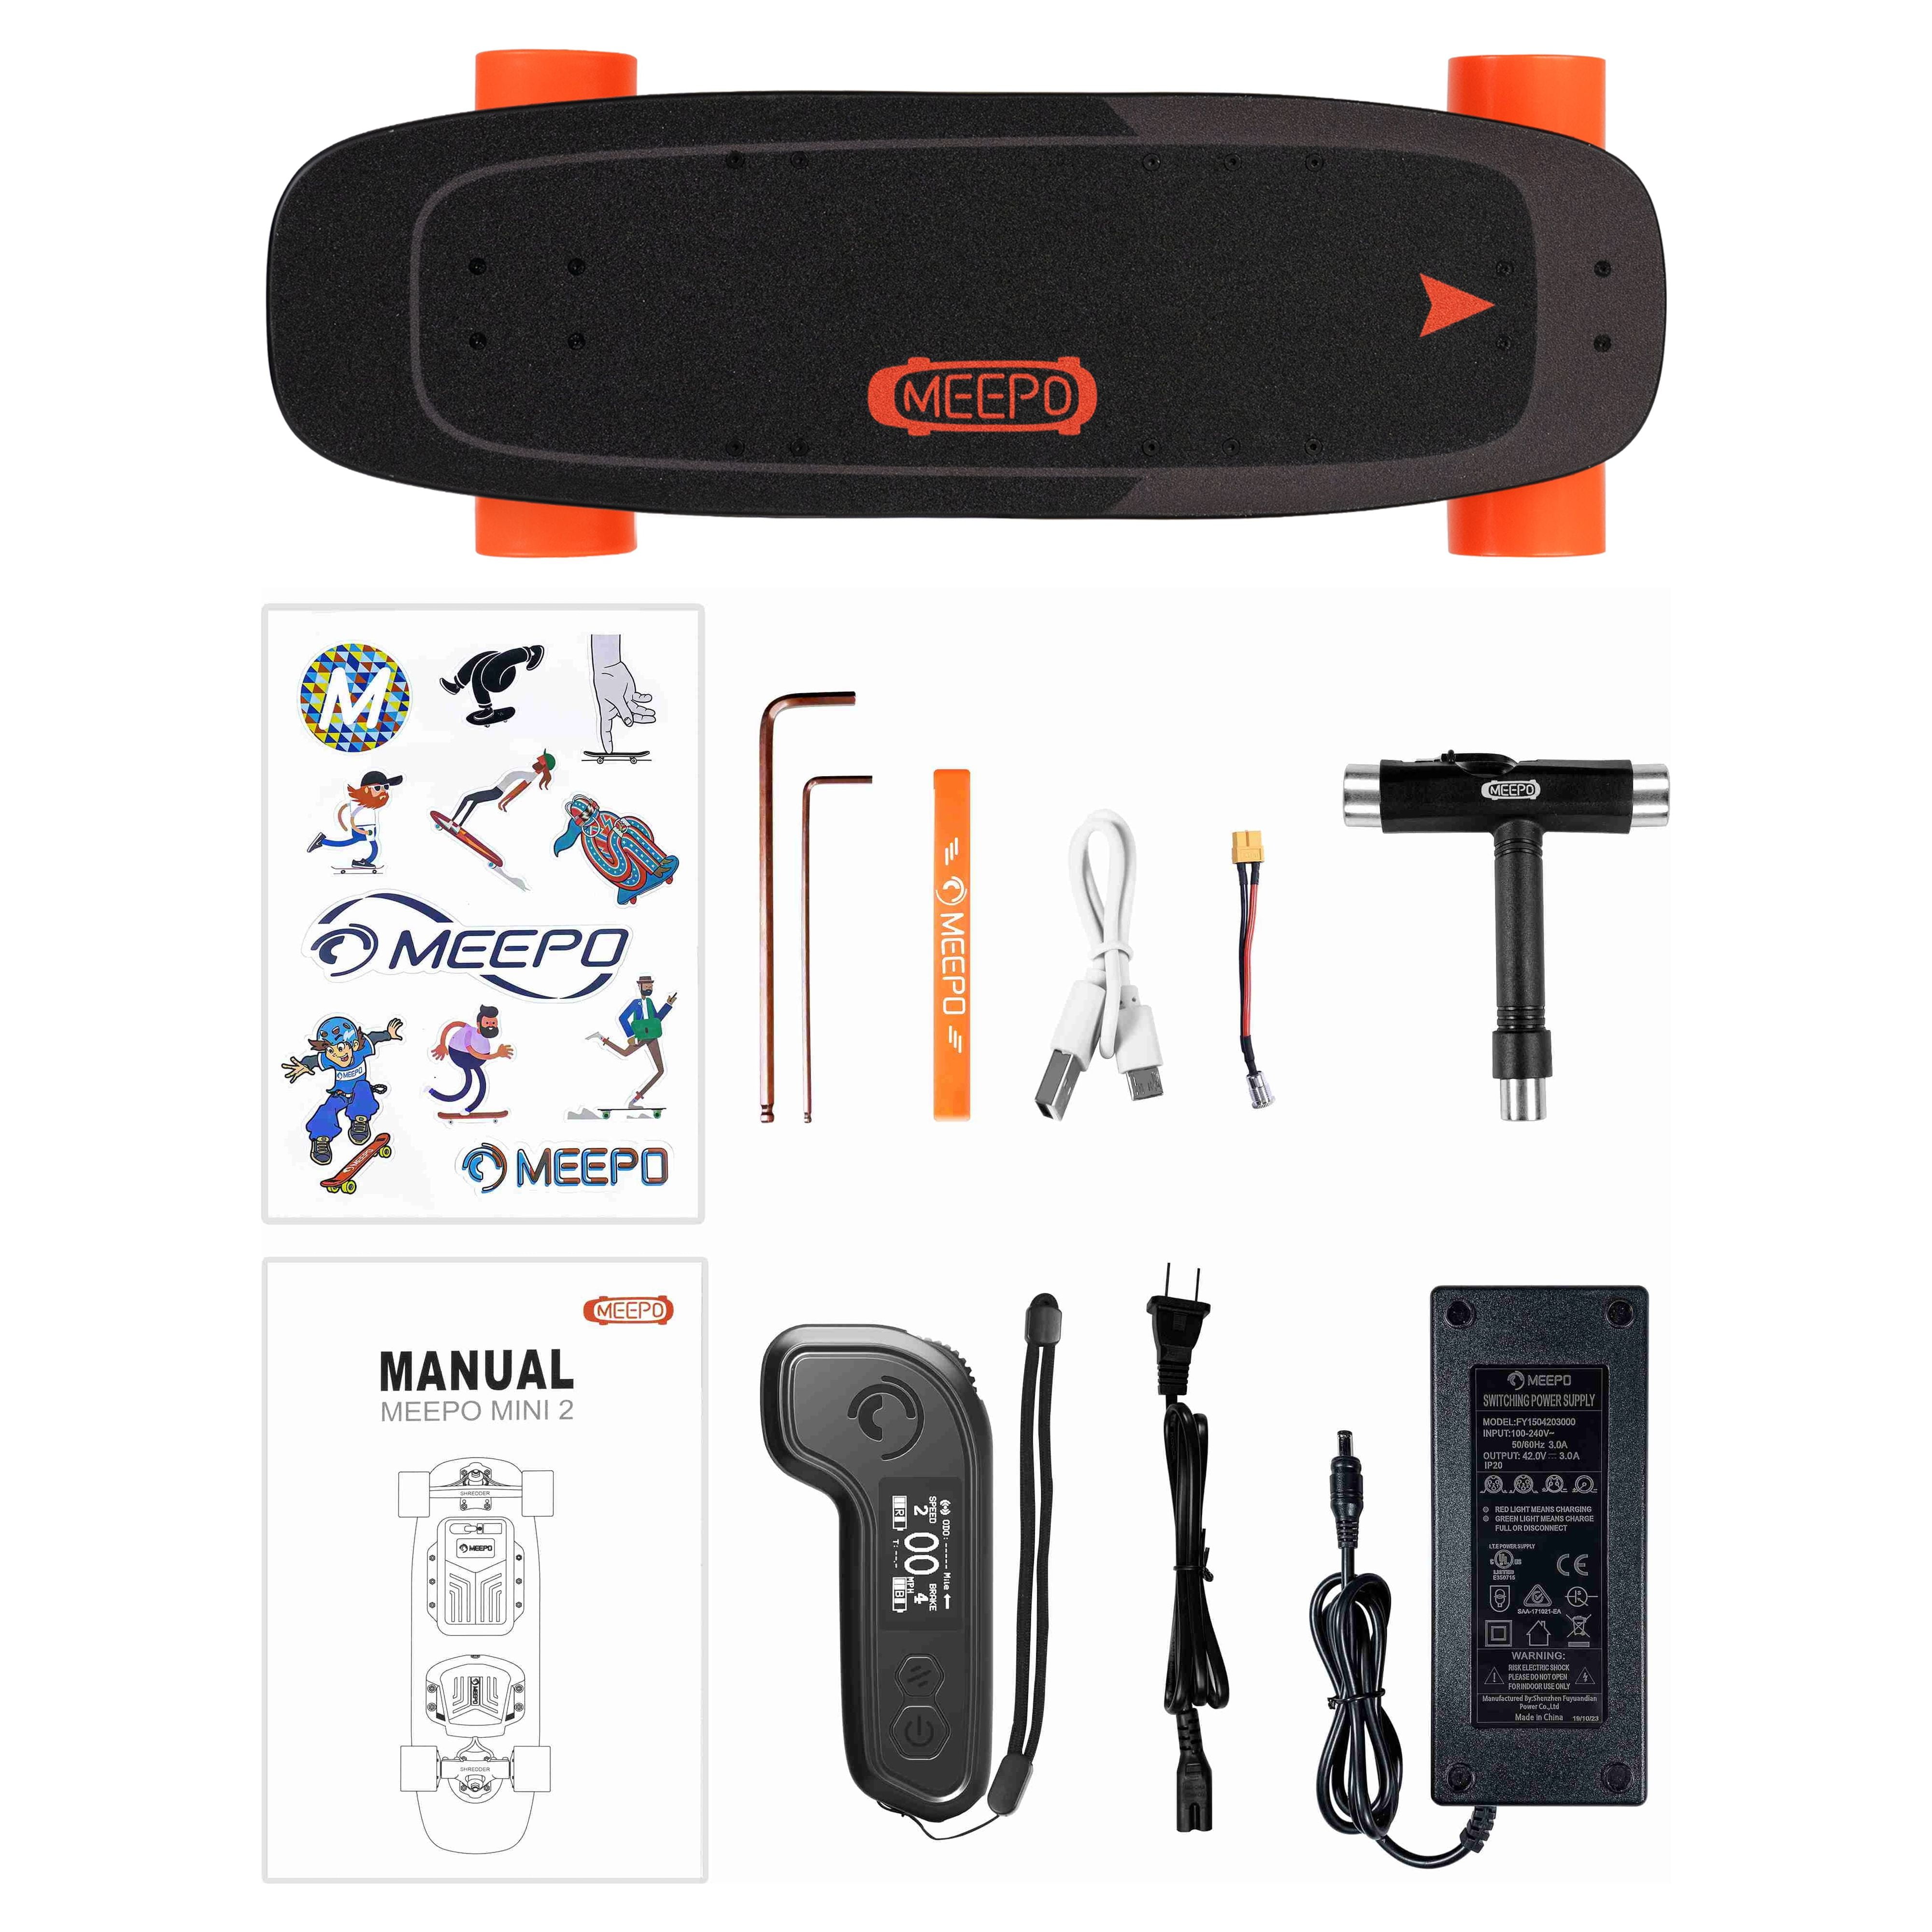  MEEPO MINI3S Electric Skateboard with Remote, 28 MPH Top  Speed, 17 Miles Range, 330 Pounds Max Load, Maple Cruiser for Adults and  Teens, Mini 3S : Sports & Outdoors